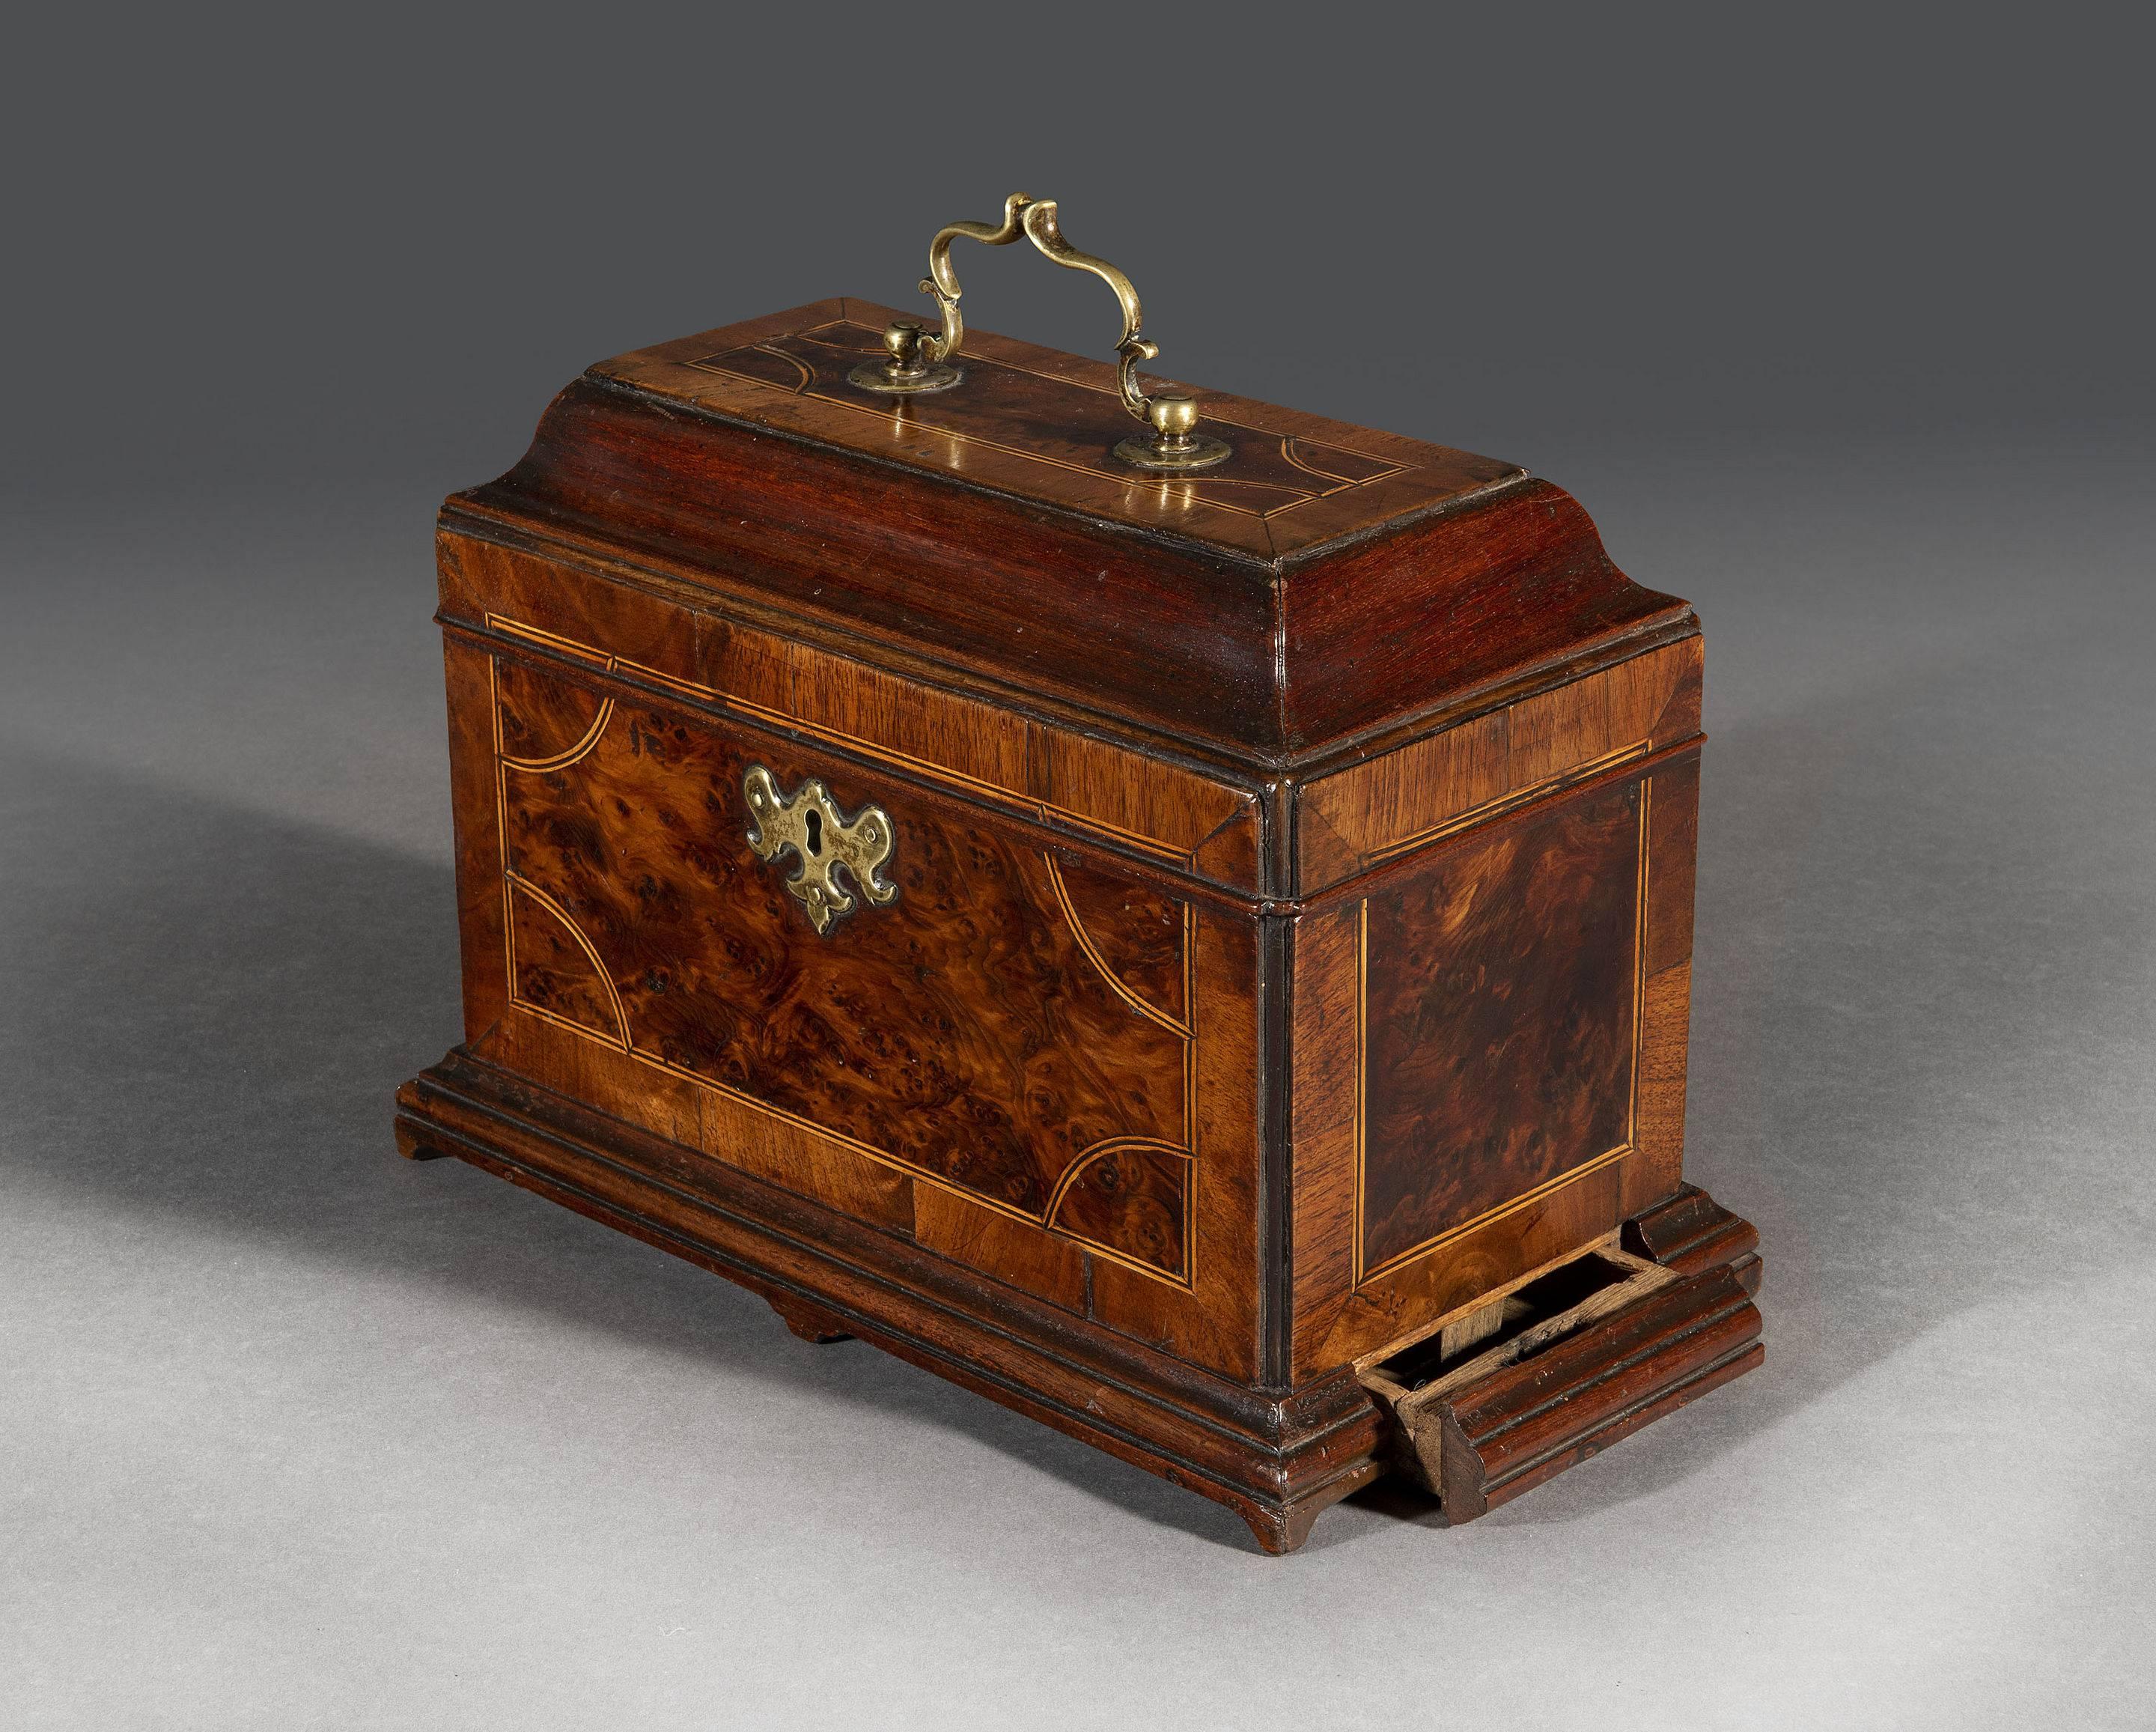 The brass mounted tea chest is fitted with the original metal tea containers and reveals a concealed spoon drawer. The walnut inlaid tea caddy stands on ogee bracket feet.